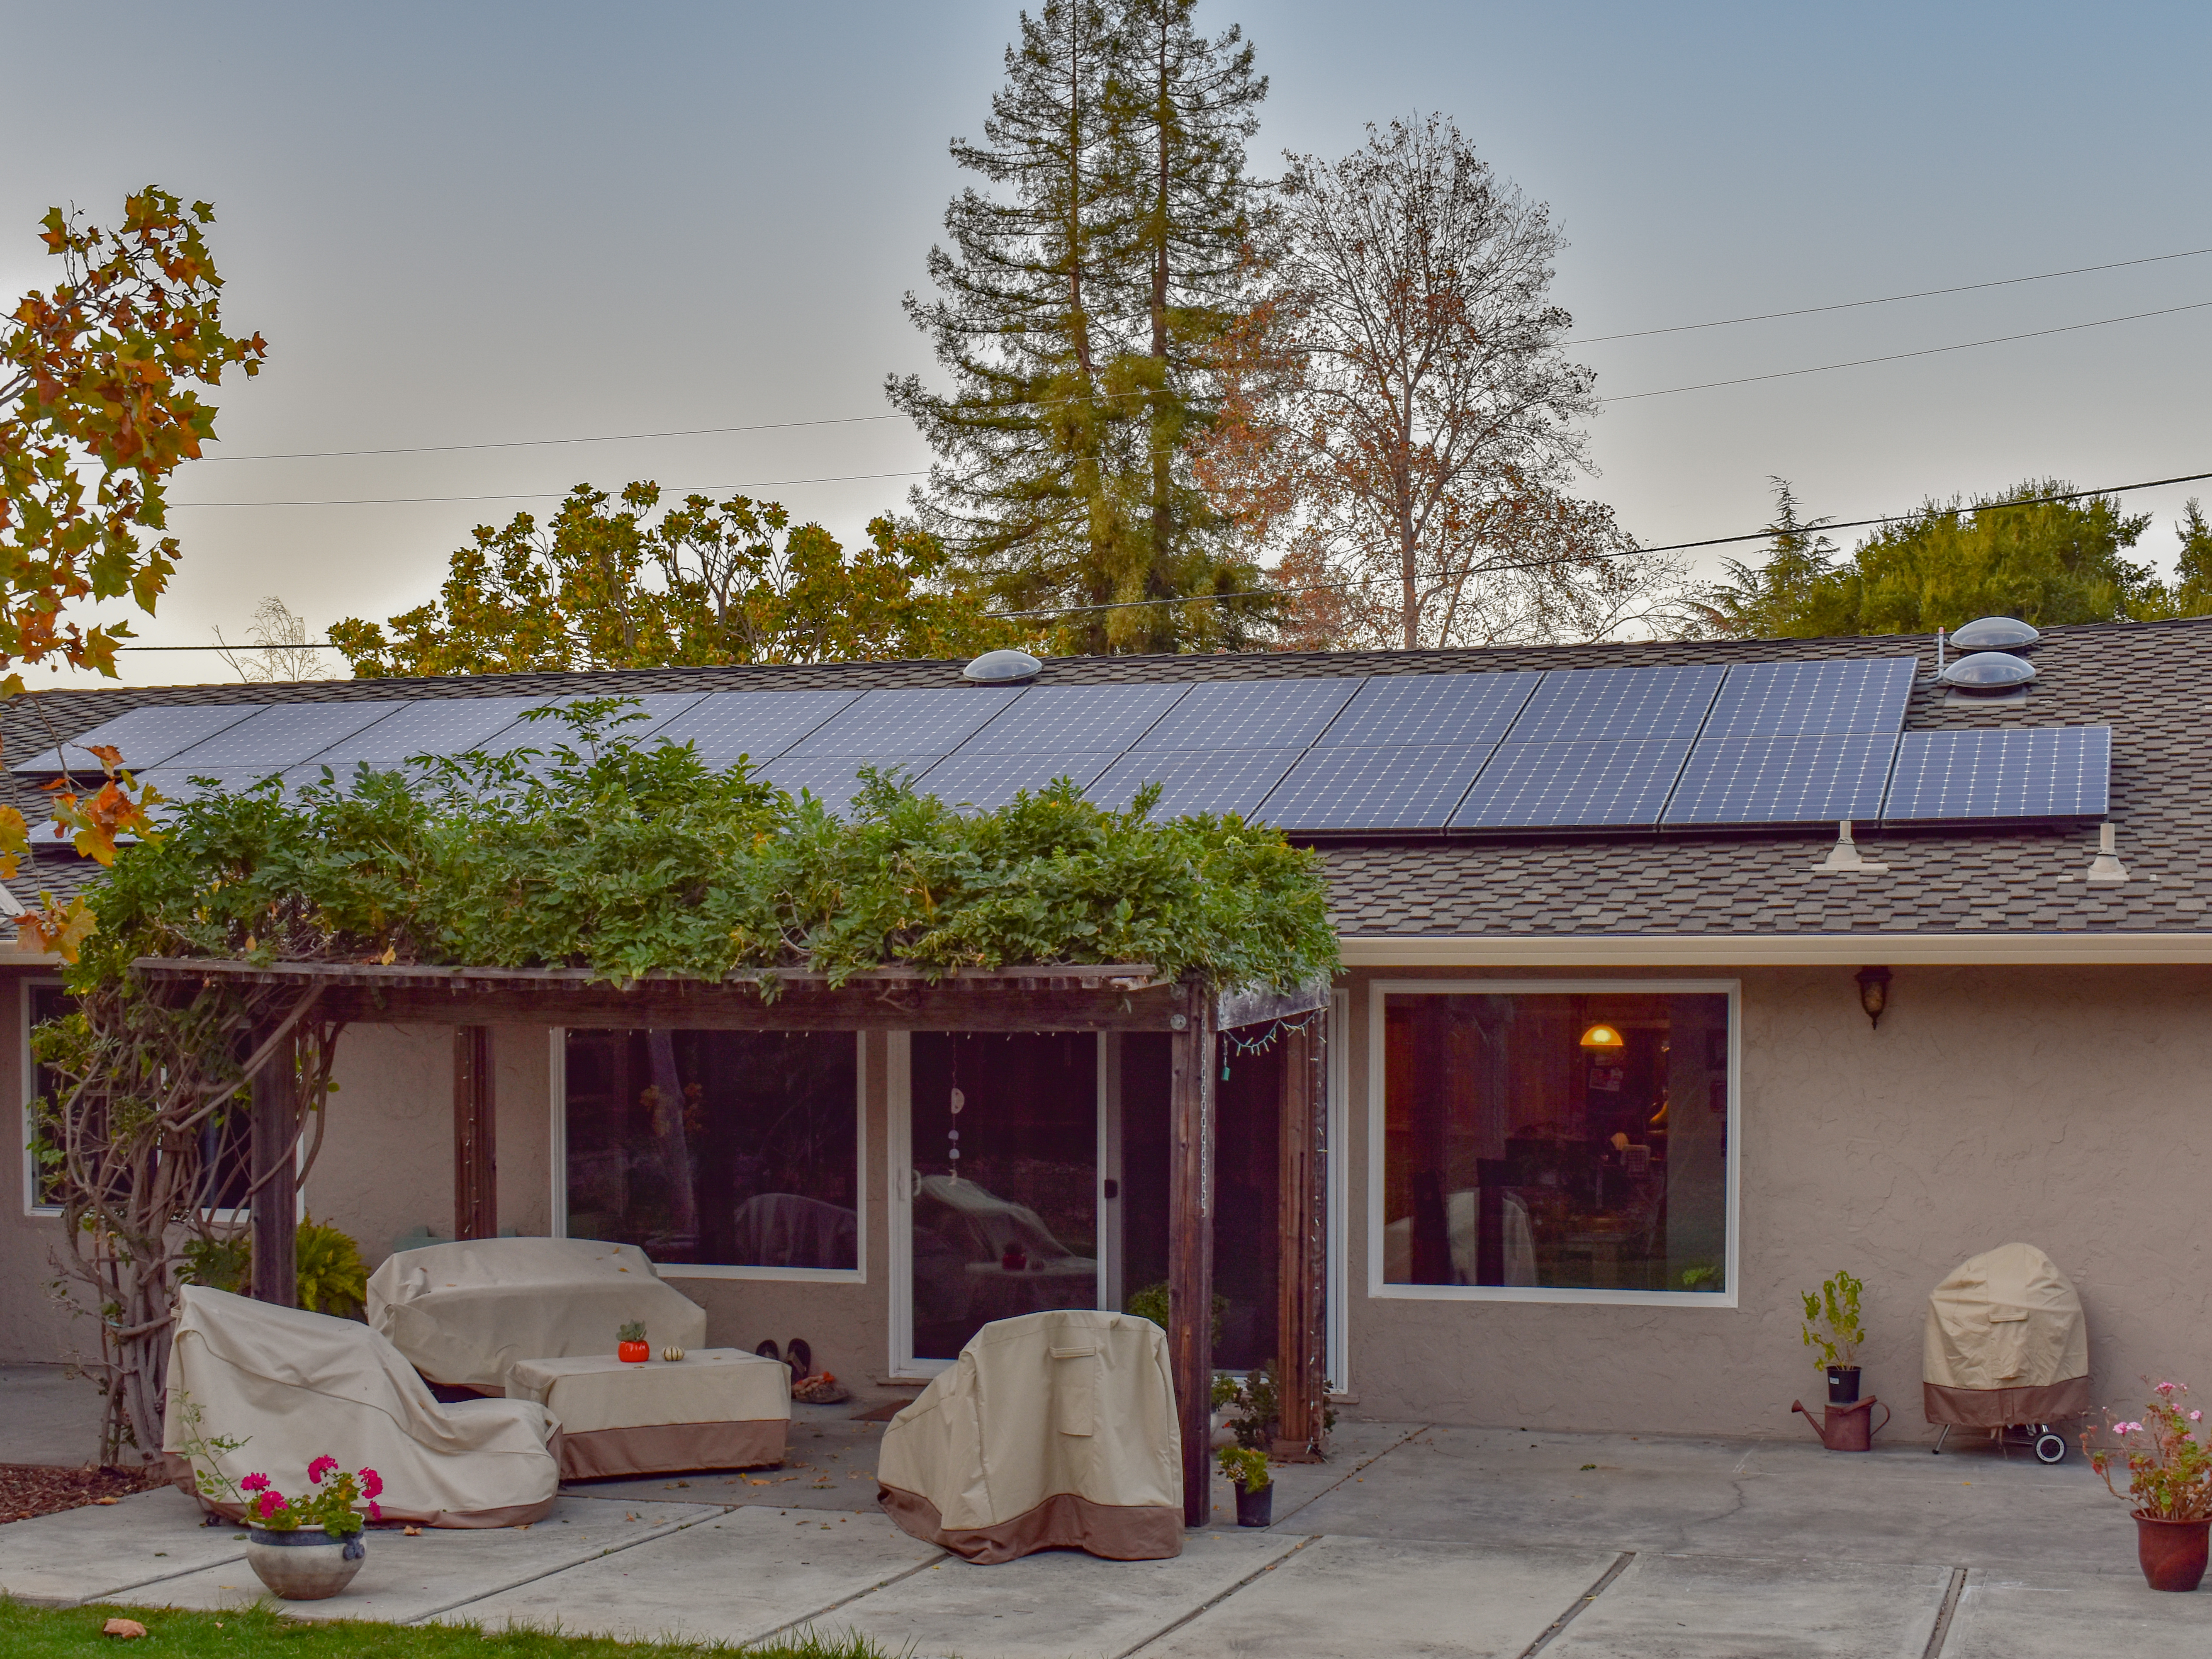 outside of a home with solar panels on the roof